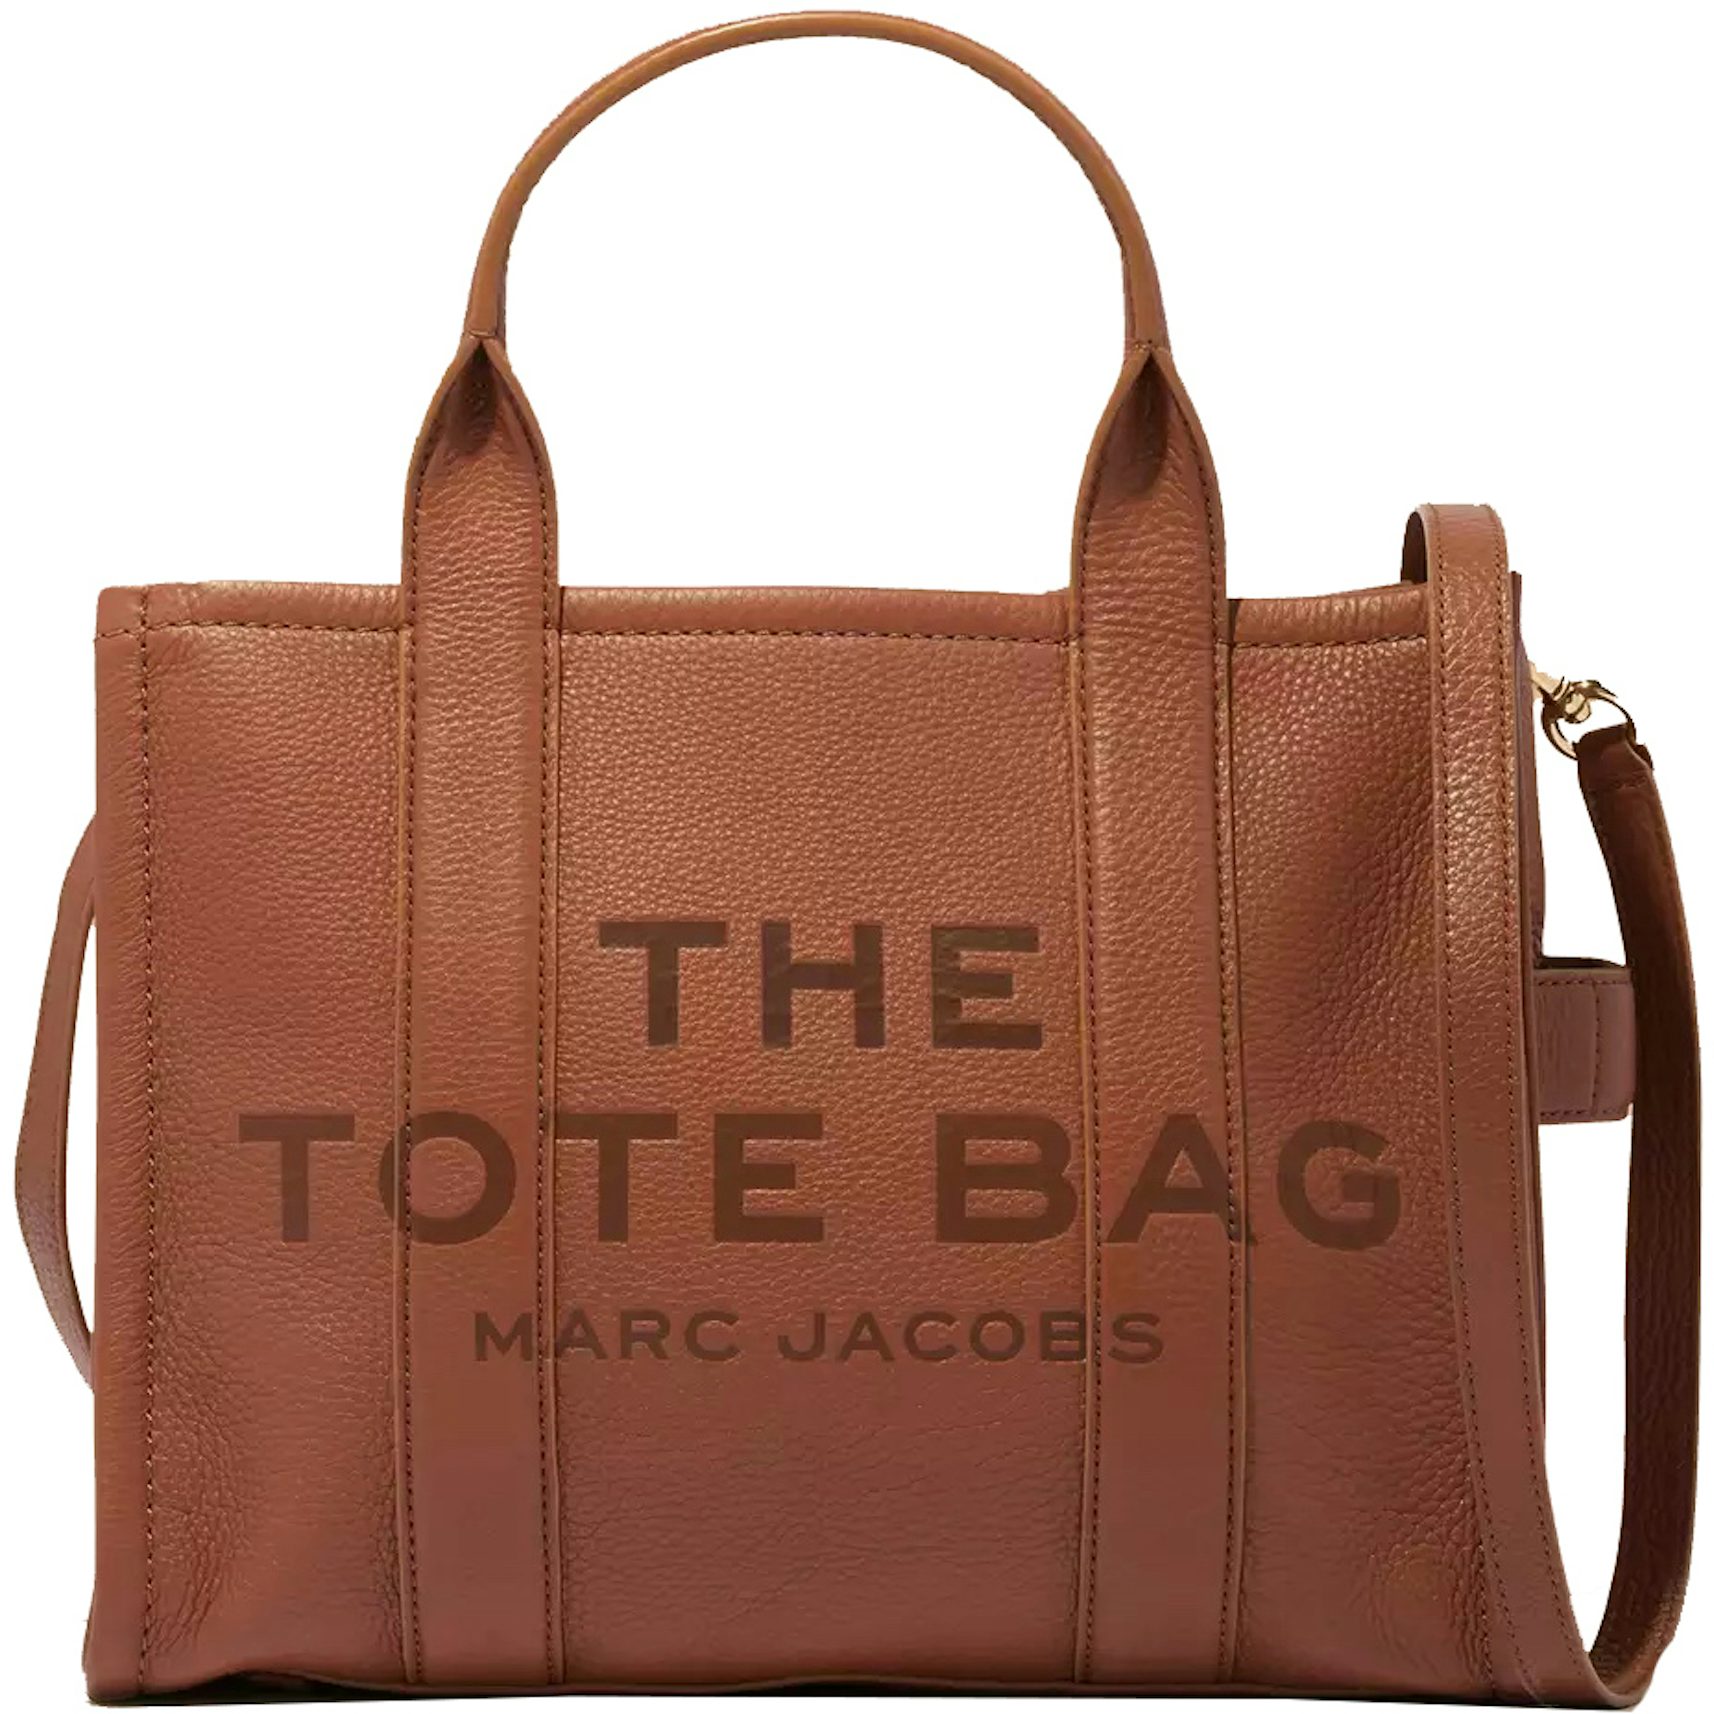 Marc By Marc Jacobs, Bags, Marc By Marc Jacobs Speedy Bag